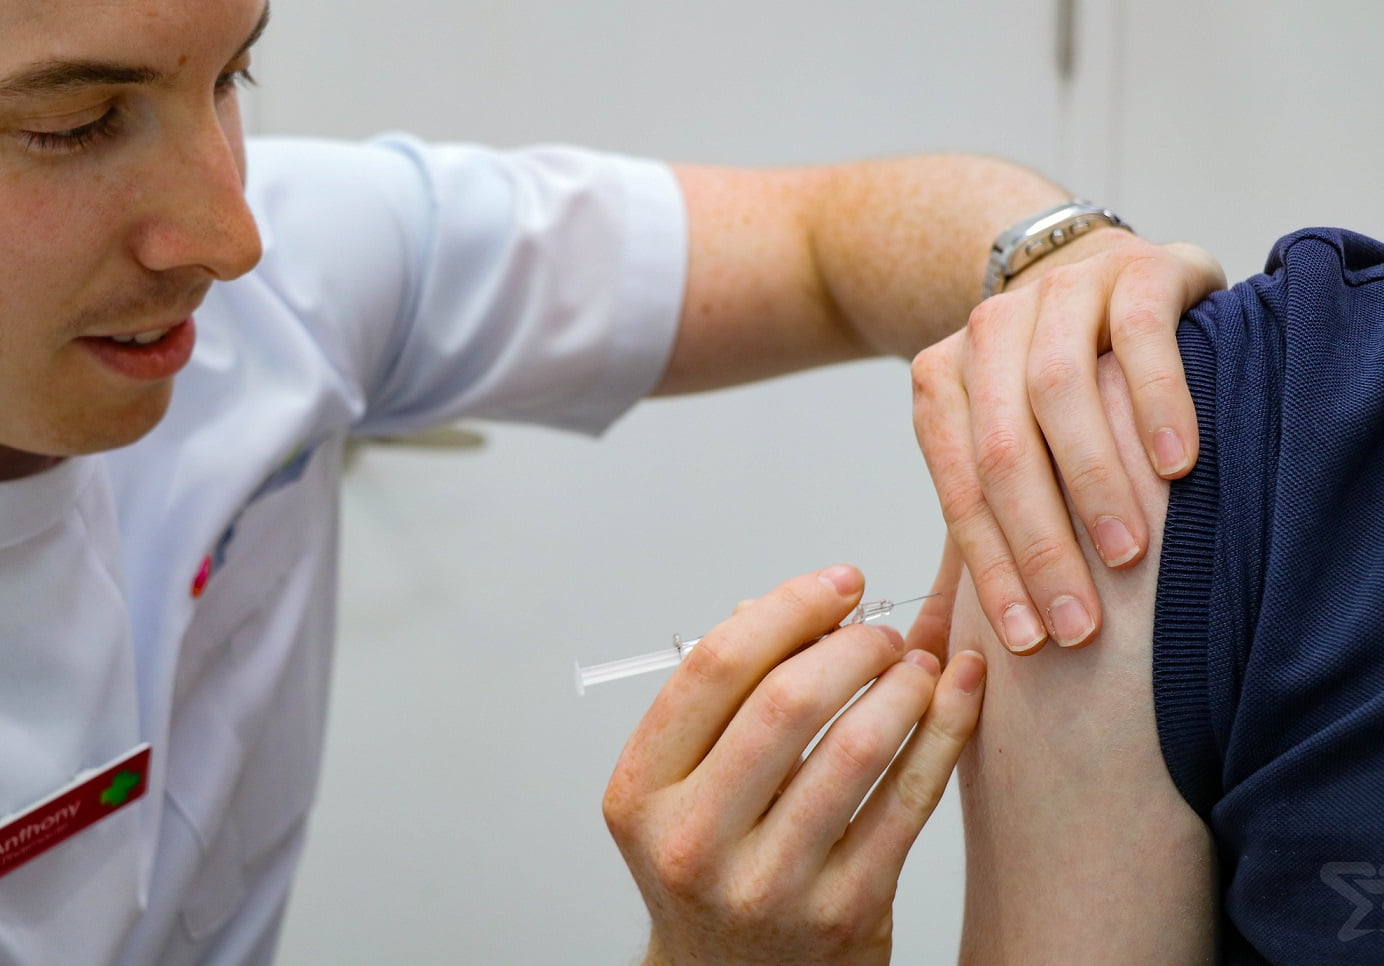 Pharmacist administers a vaccine. Source: PSA.